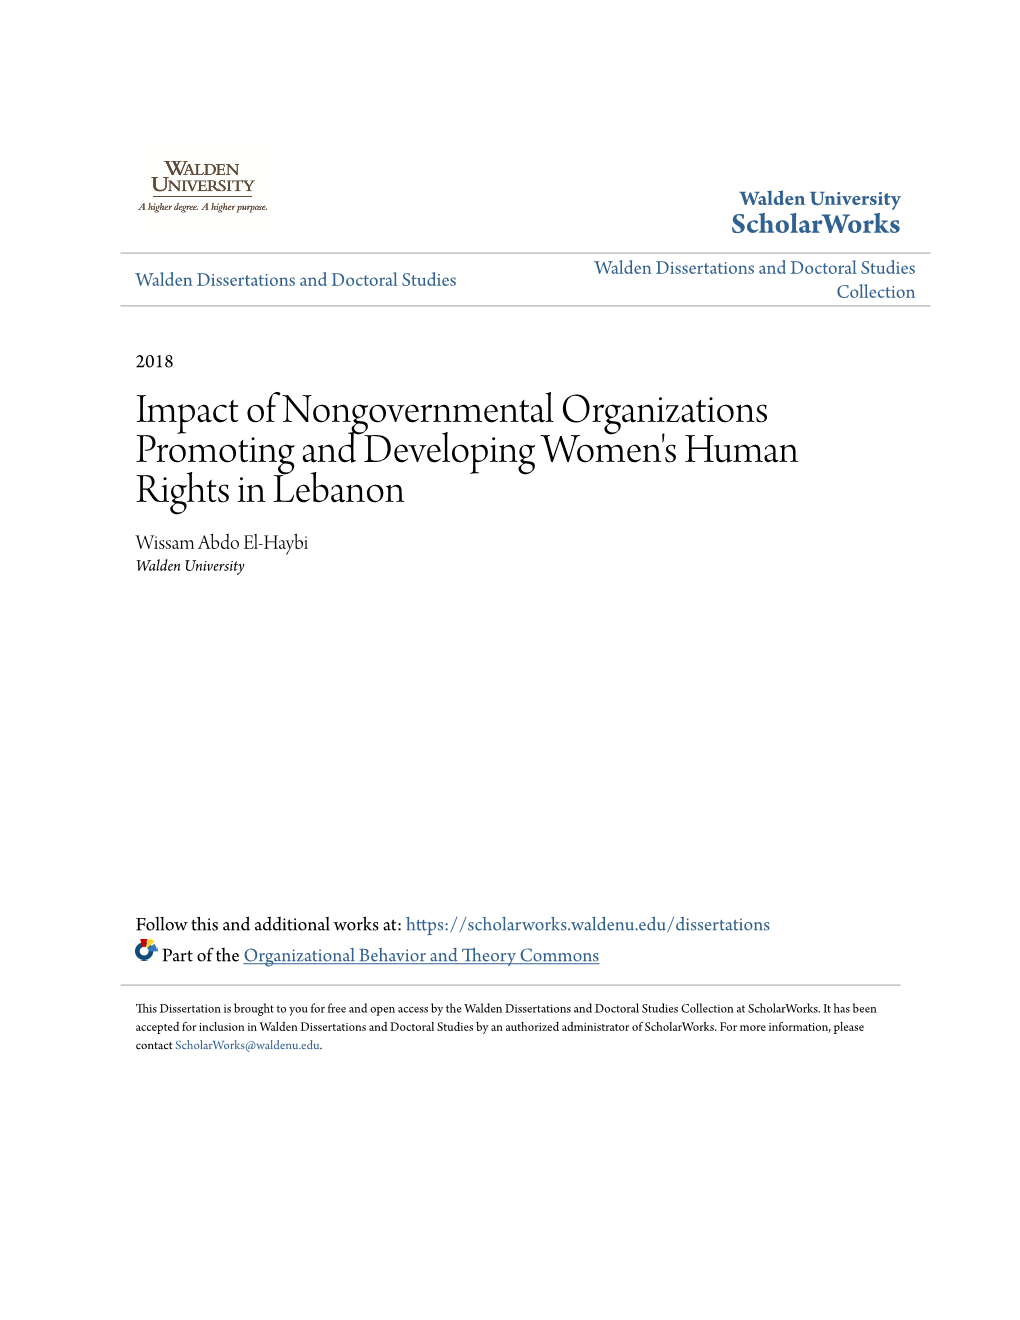 Impact of Nongovernmental Organizations Promoting and Developing Women's Human Rights in Lebanon Wissam Abdo El-Haybi Walden University